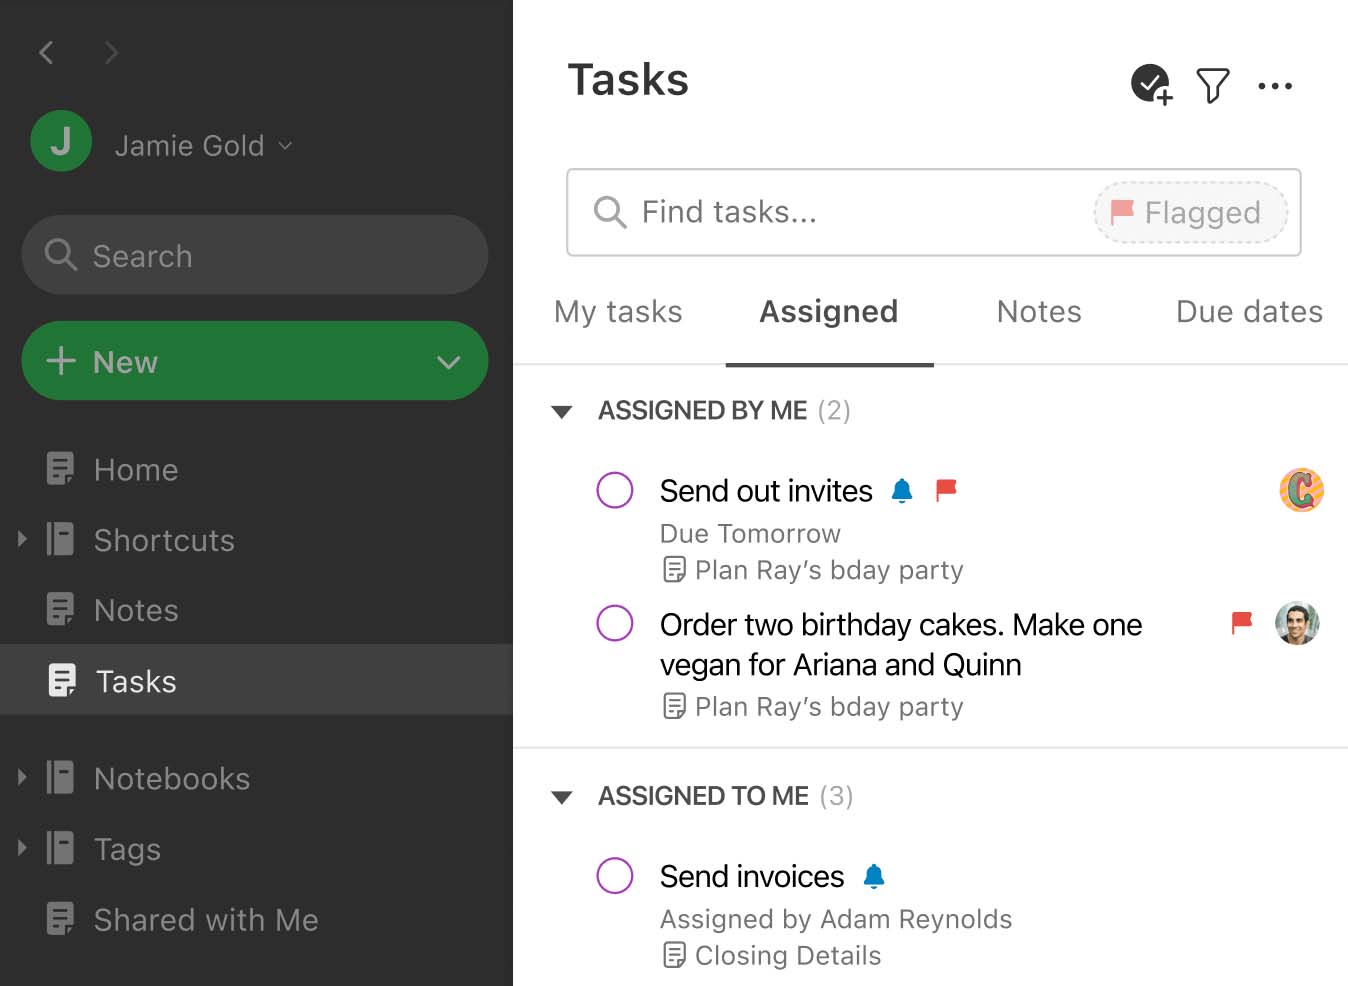 The 'Assigned' tab in the Tasks view